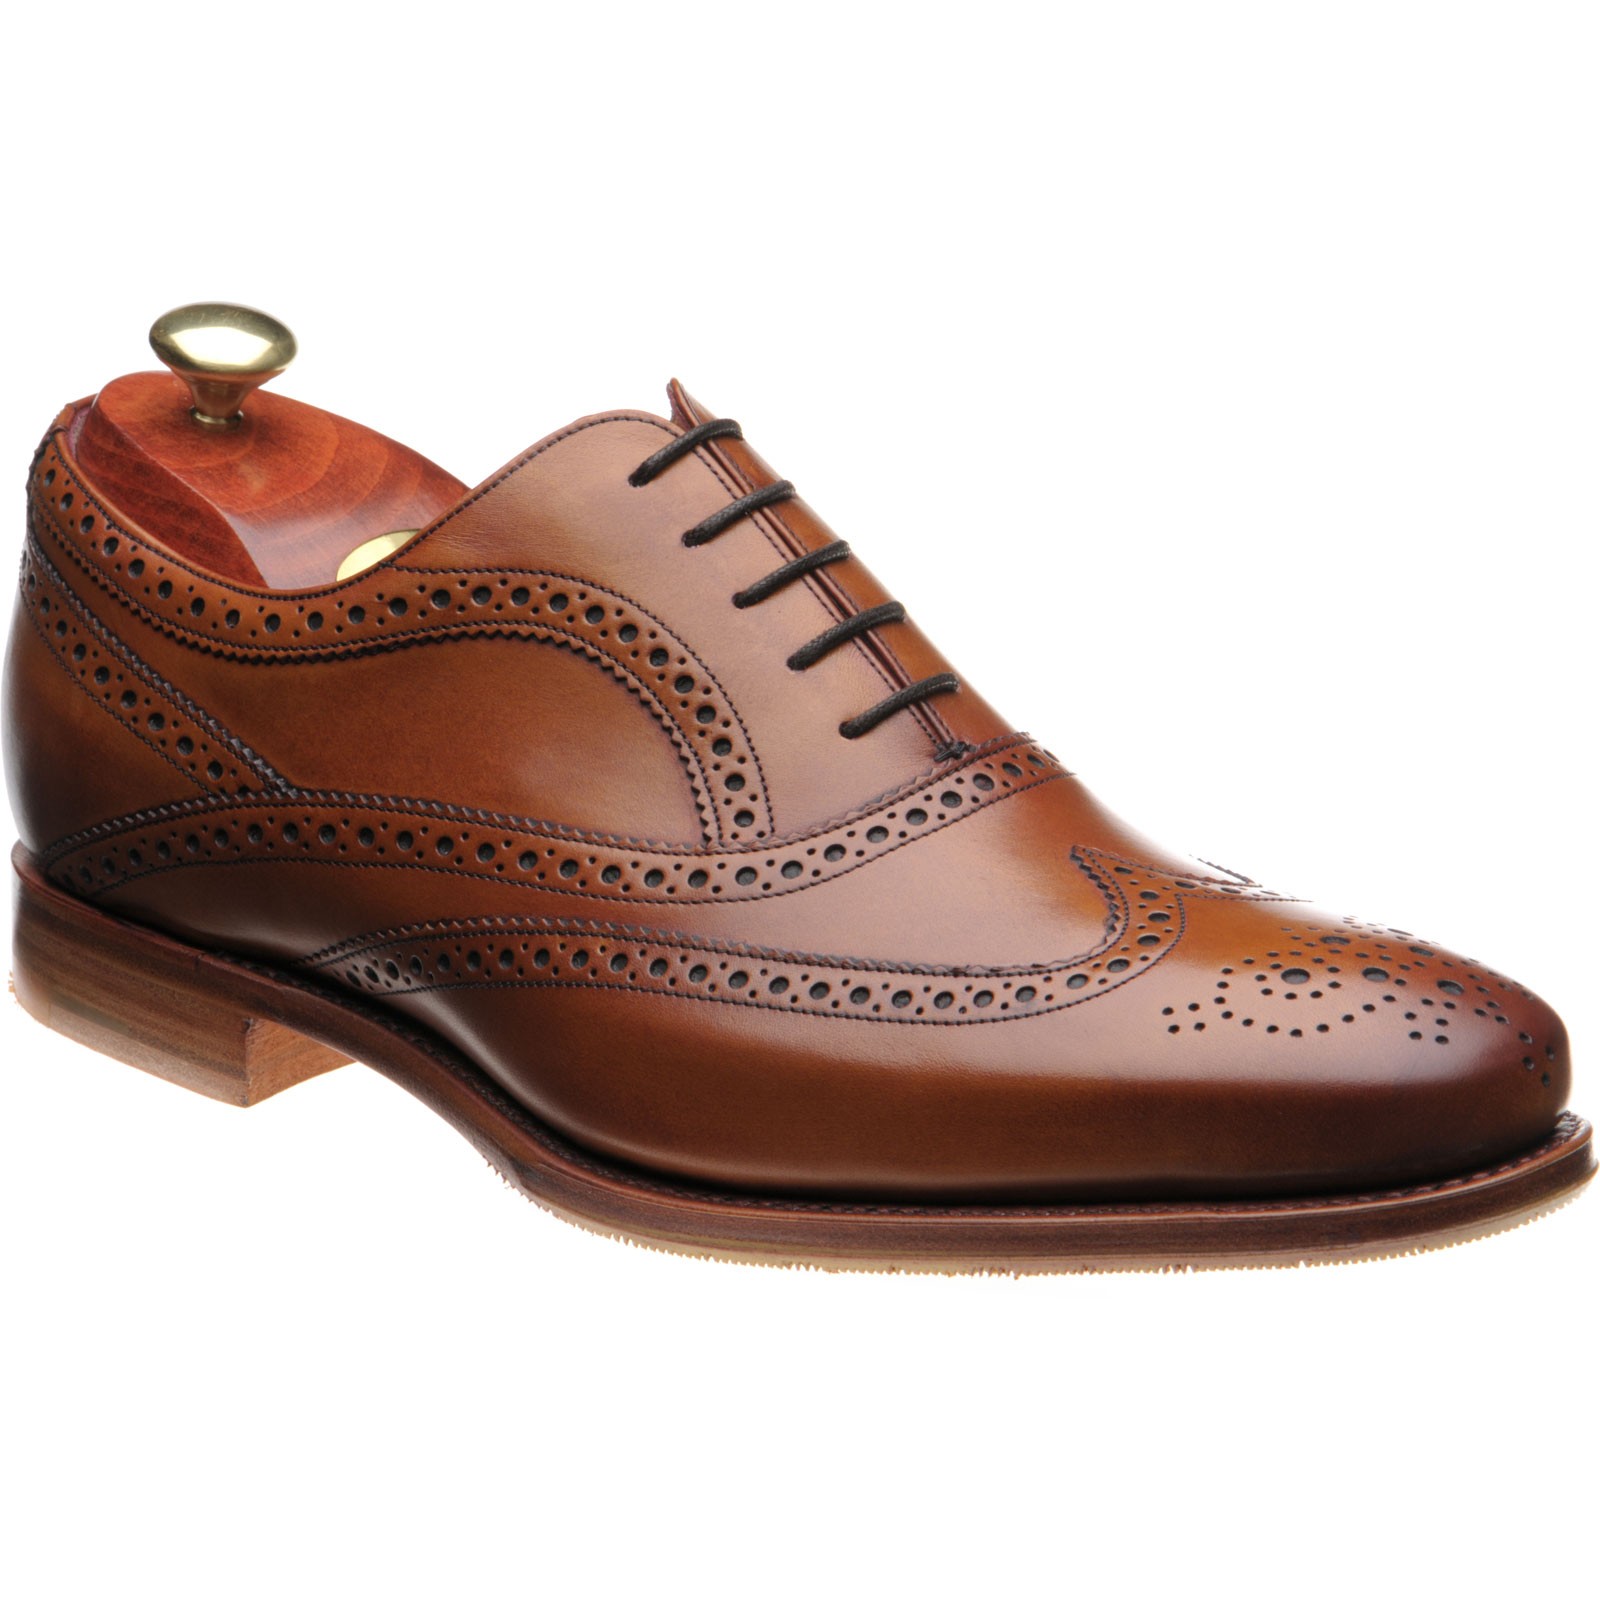 Barker shoes | Barker Tech | Turing in Antique Rosewood at Herring Shoes